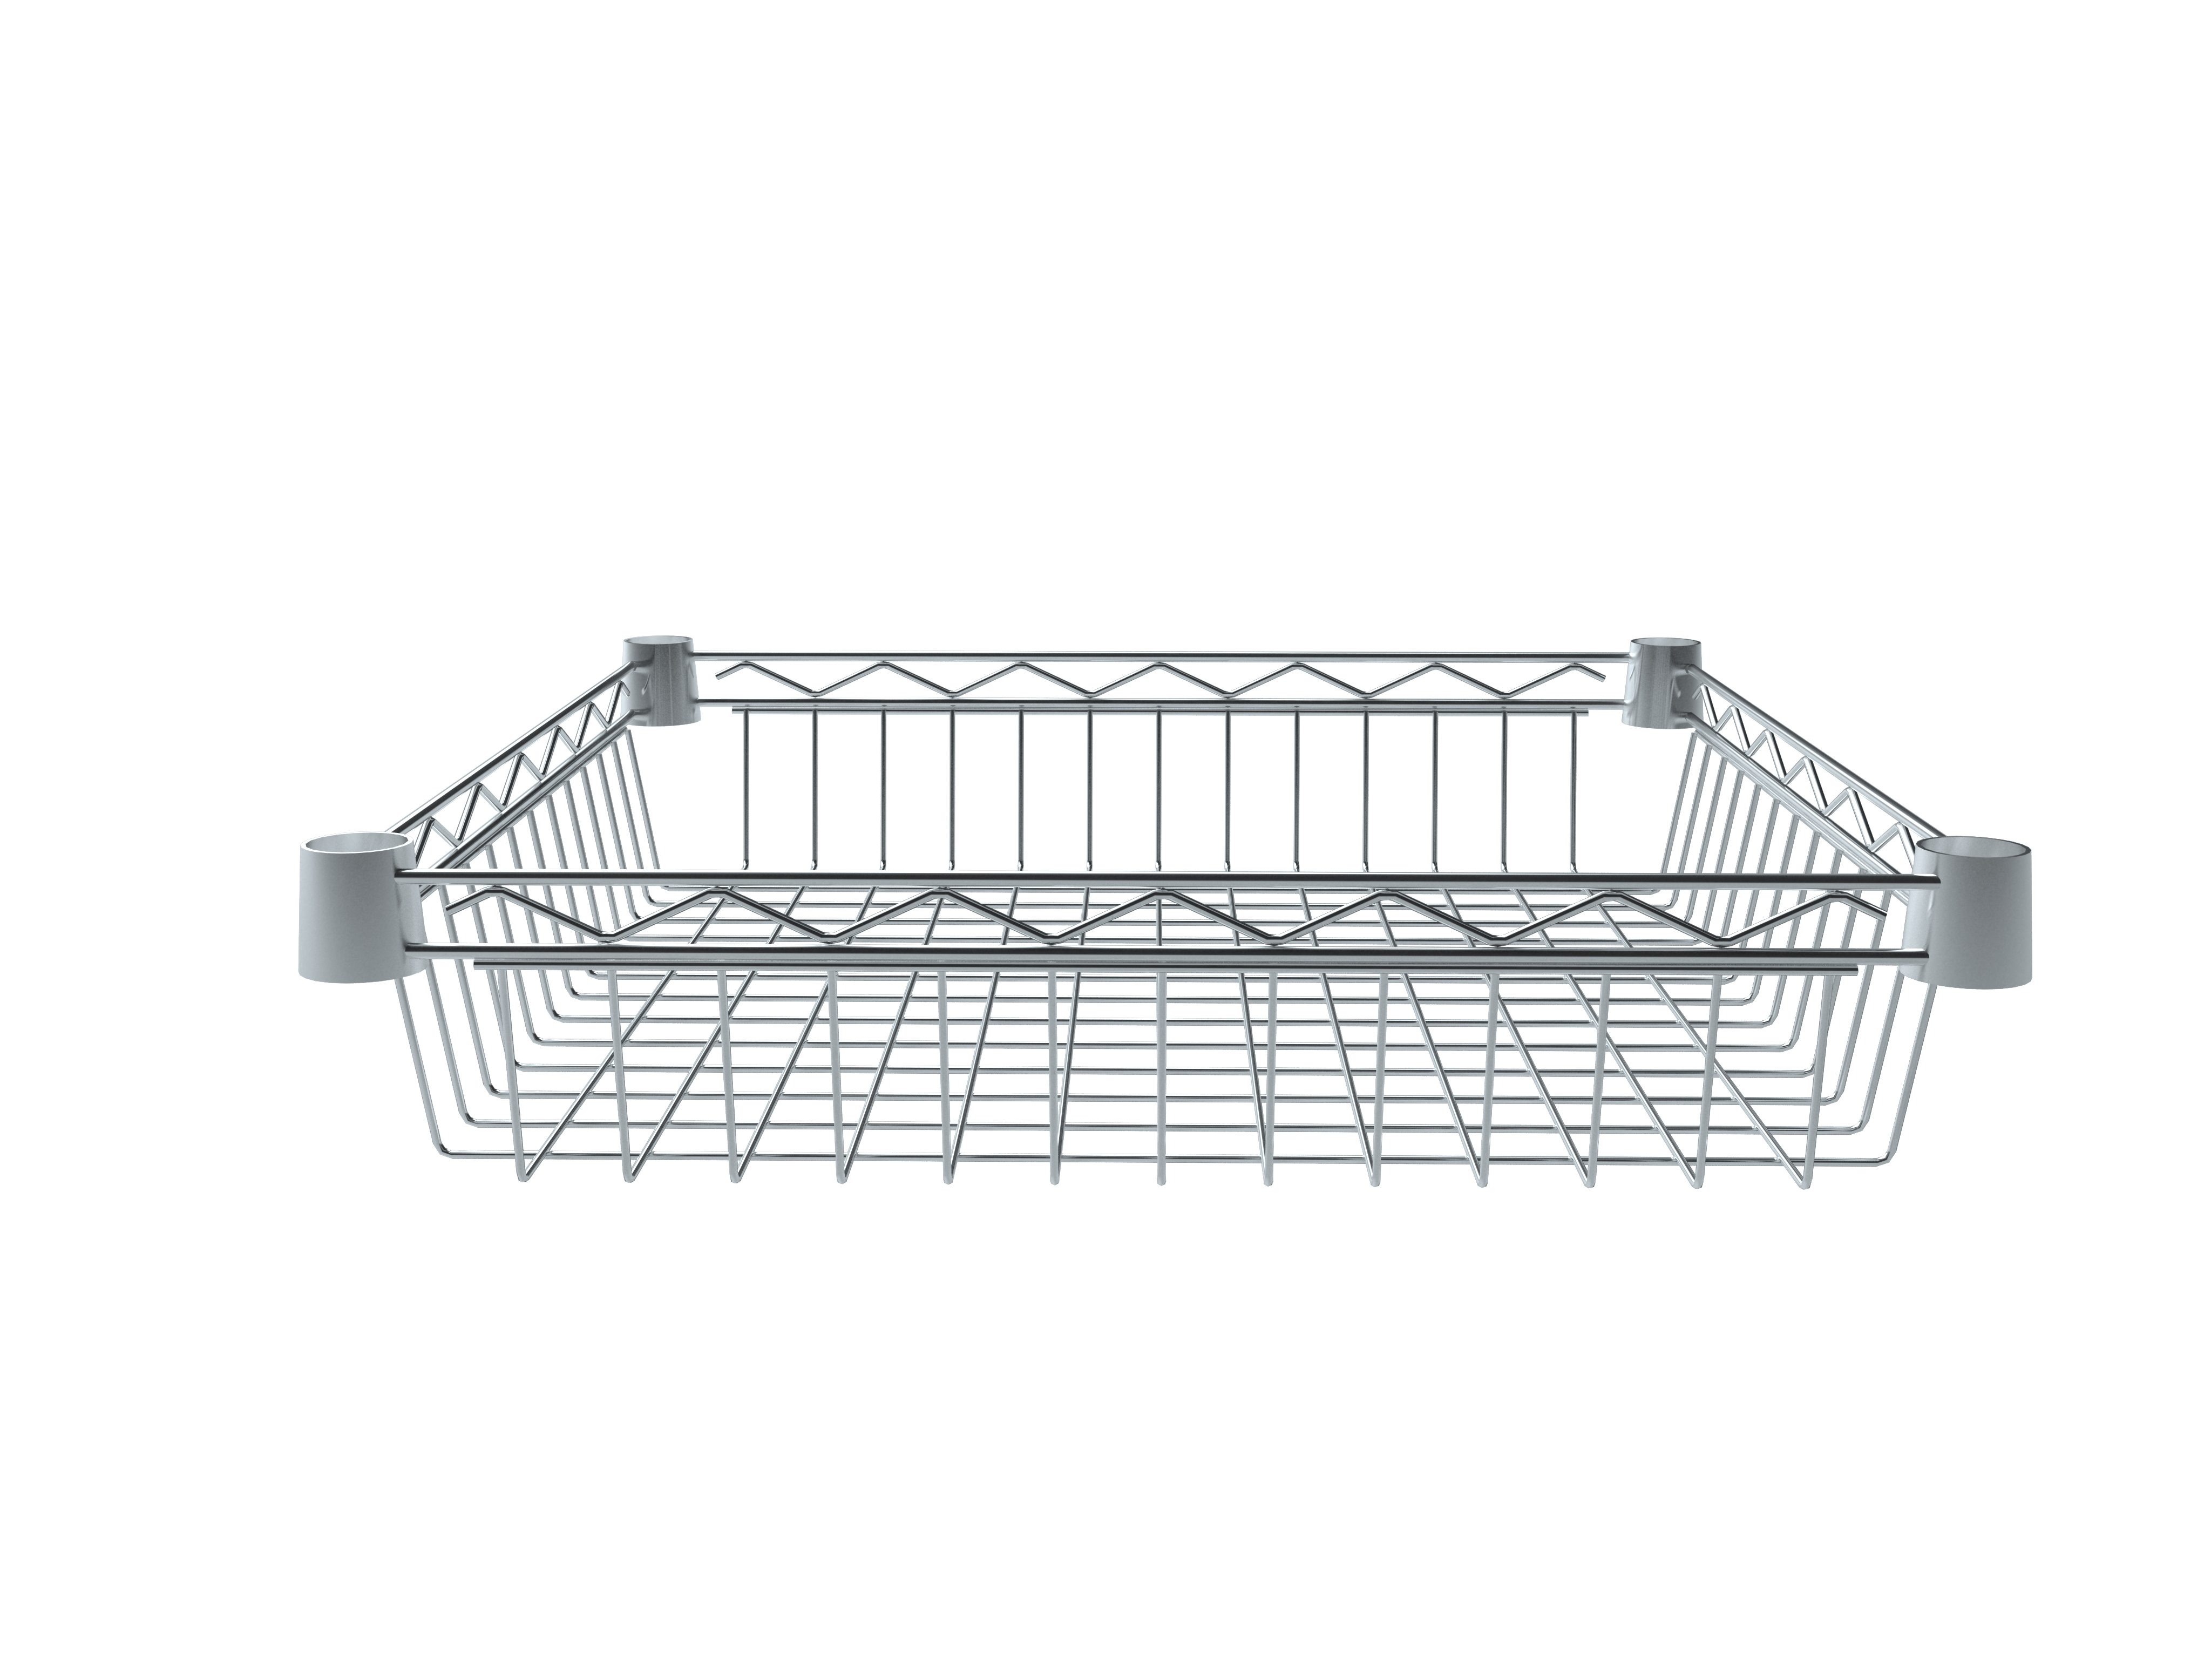 HSS Extra Wire Basket 16"x16"x4" Deep Fits on 7/8" Pole Diameter, Chrome - image 3 of 3